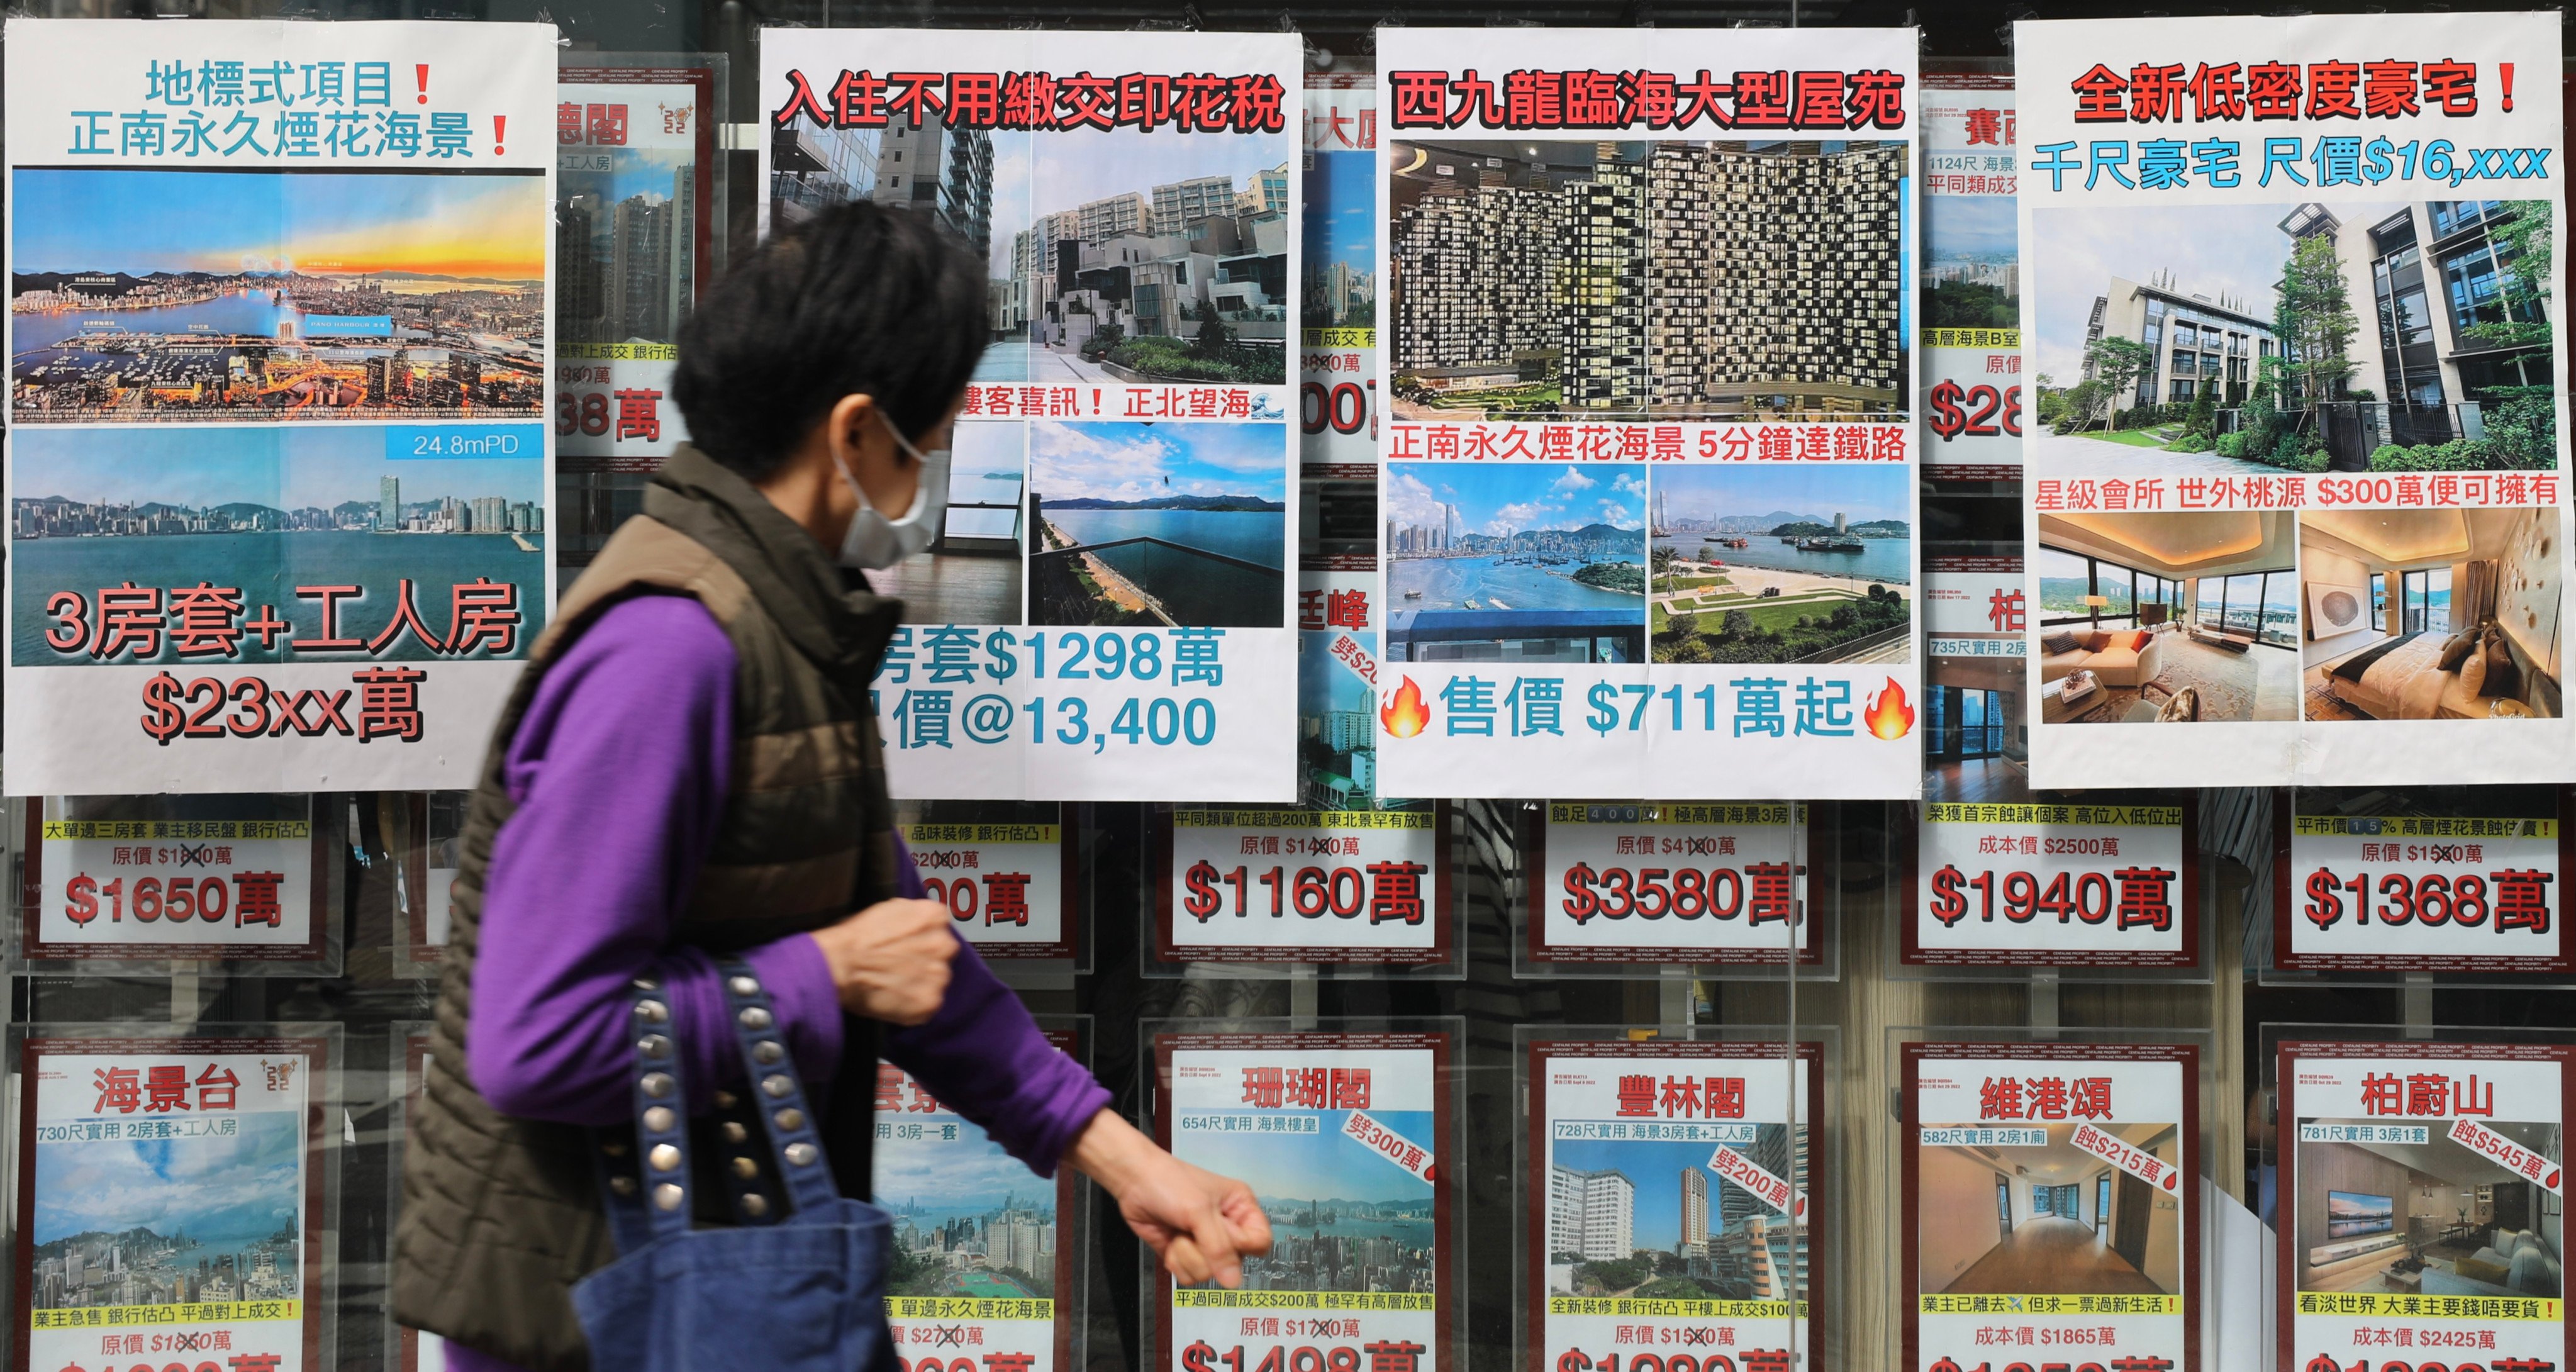 Ad valorem tax cut for cheaper homes has boosted Hong Kong property market. 

Photo: SCMP / Xiaomei Chen